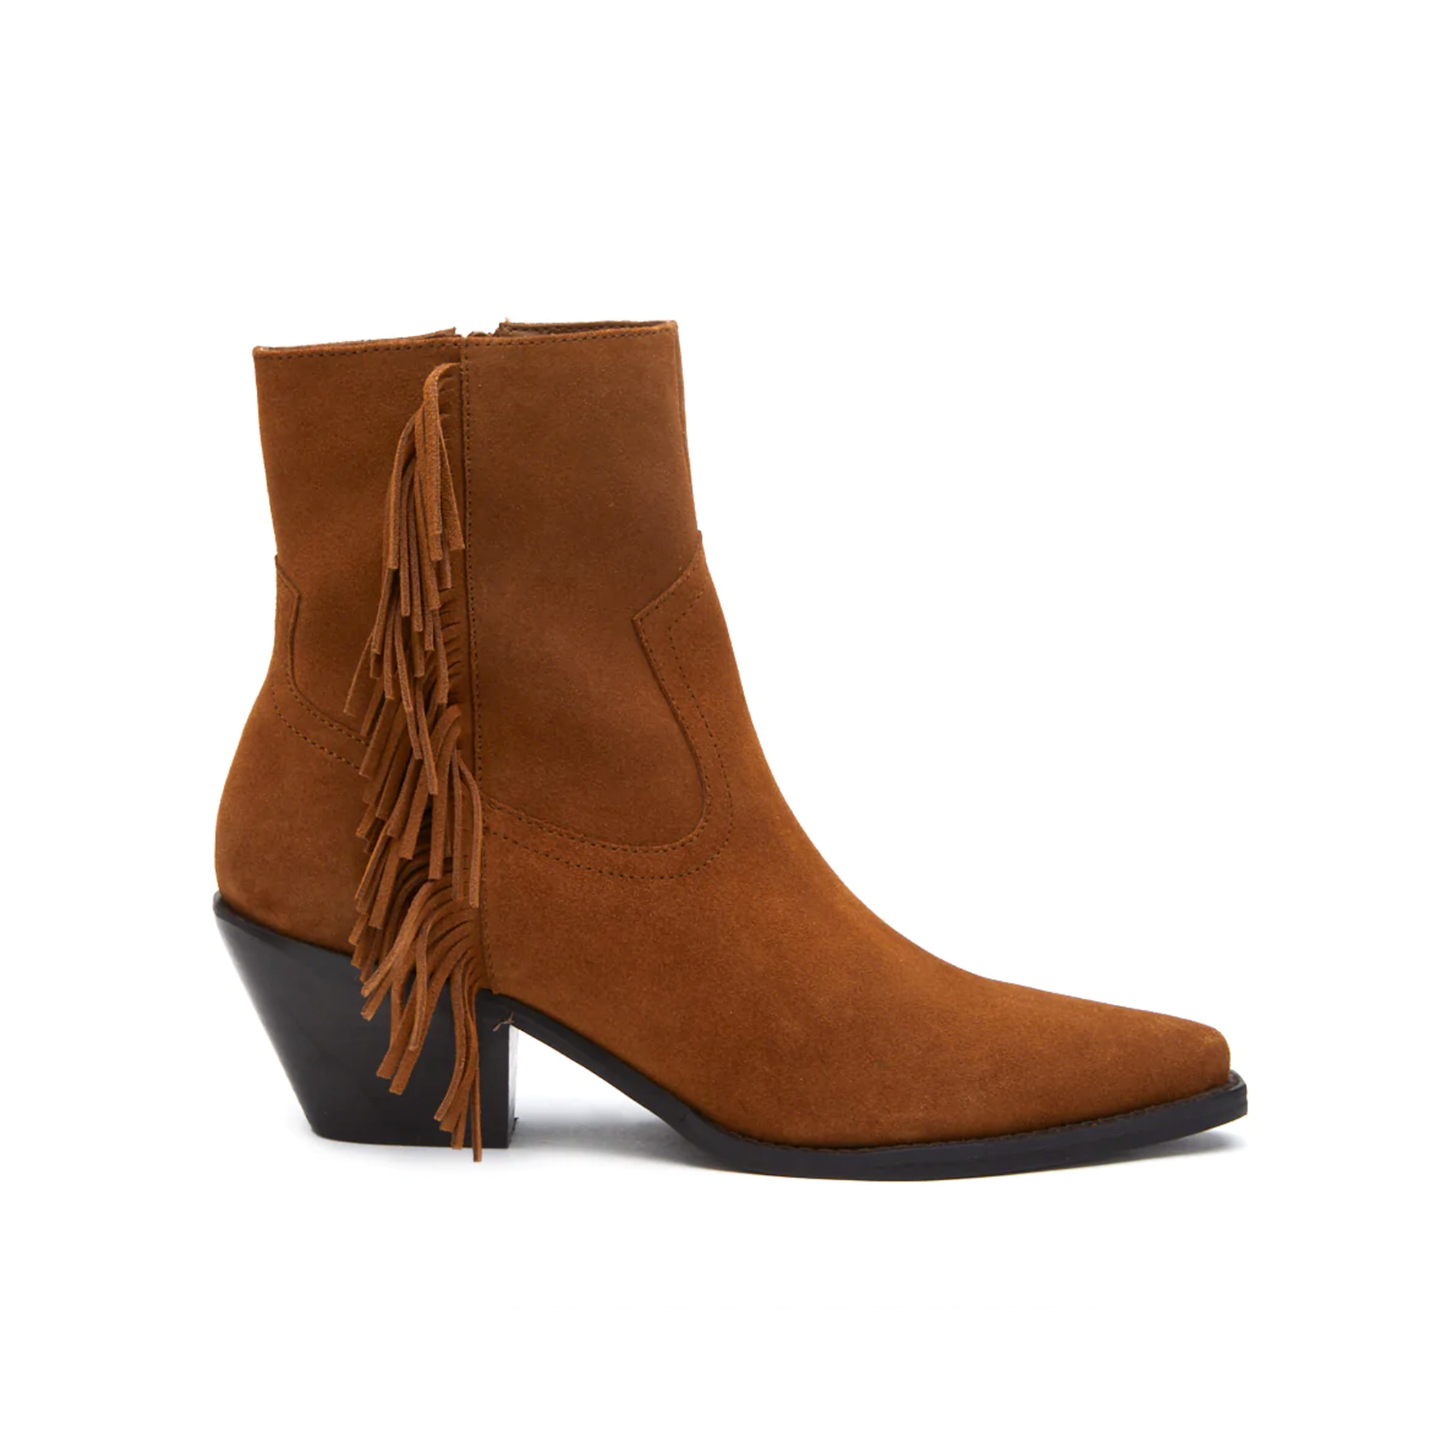 Fashionable yet practical, this Western-inspired bootie is just perfect for walking around town everyday. Thoughtfully constructed, and detailed with fringes to lend feminine flair with a side zipper closure for a snug fit